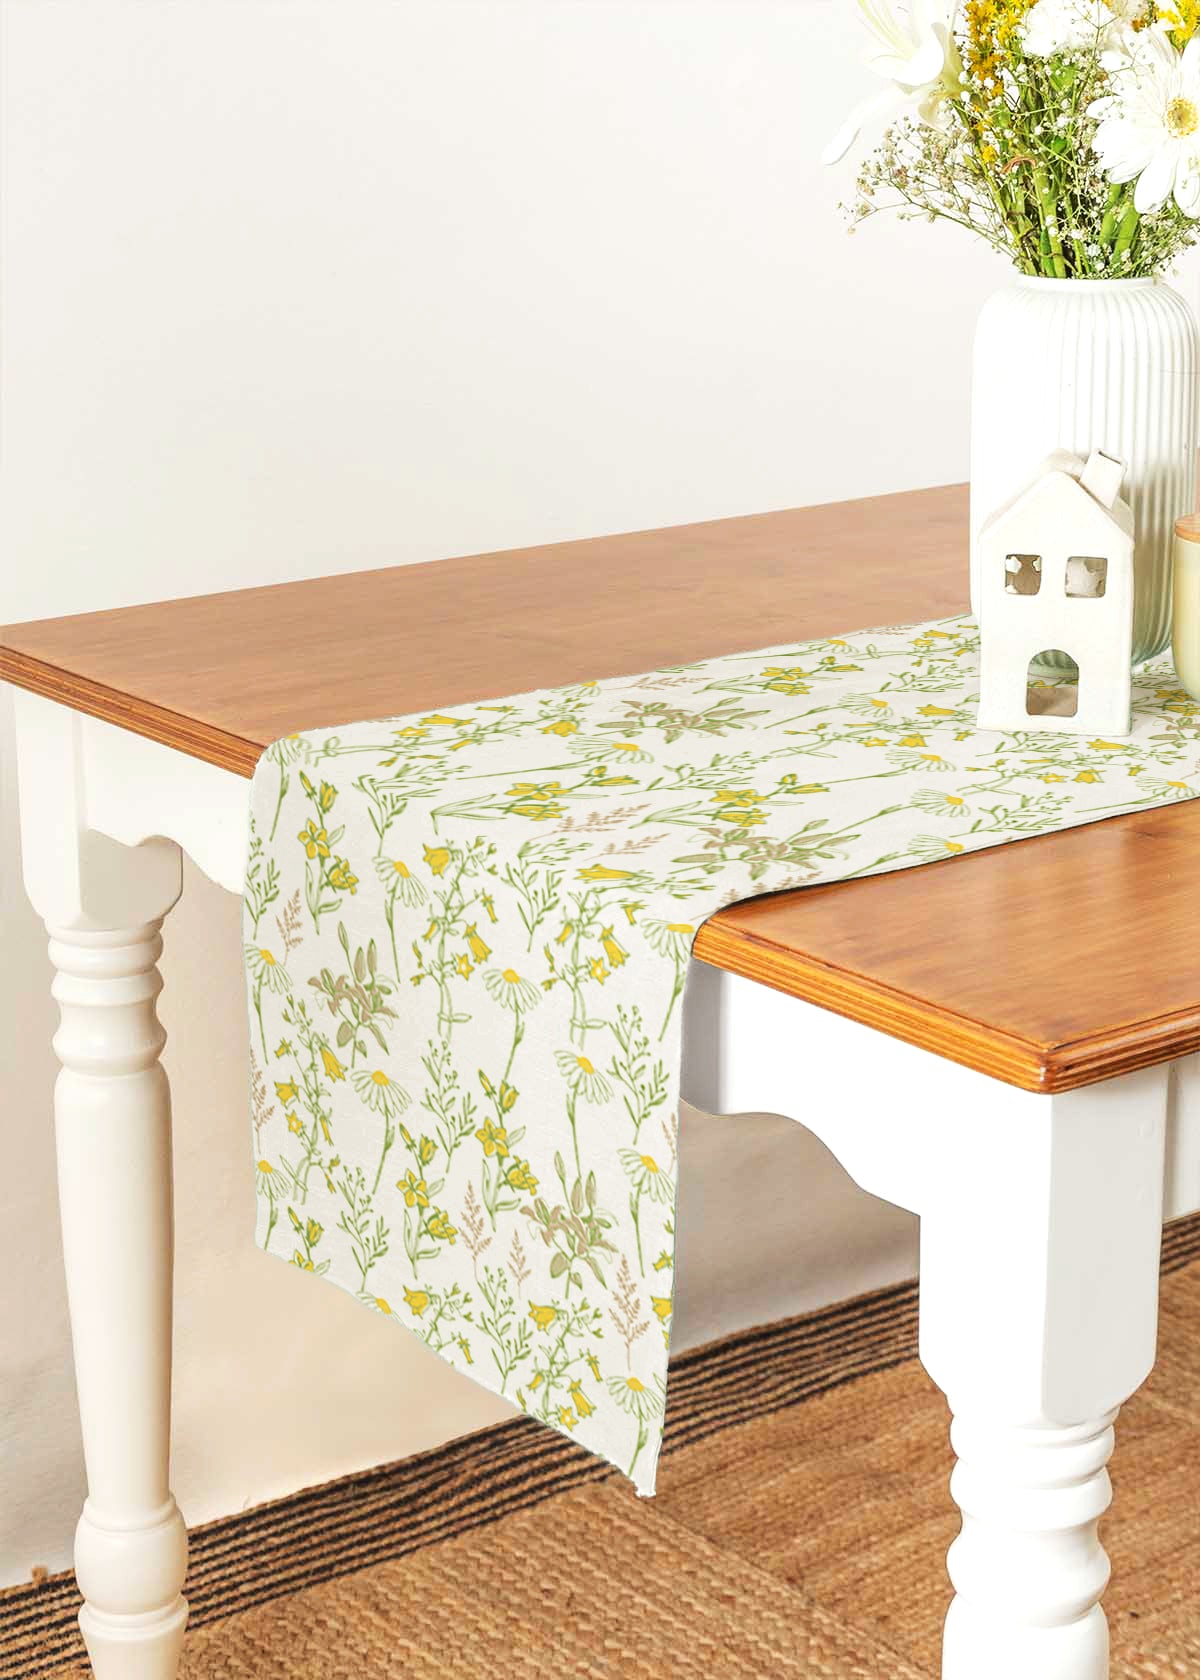 Tulip garden 100% cotton floral table runner for 4 seater or 6 seater Dining with tassels - Multicolor